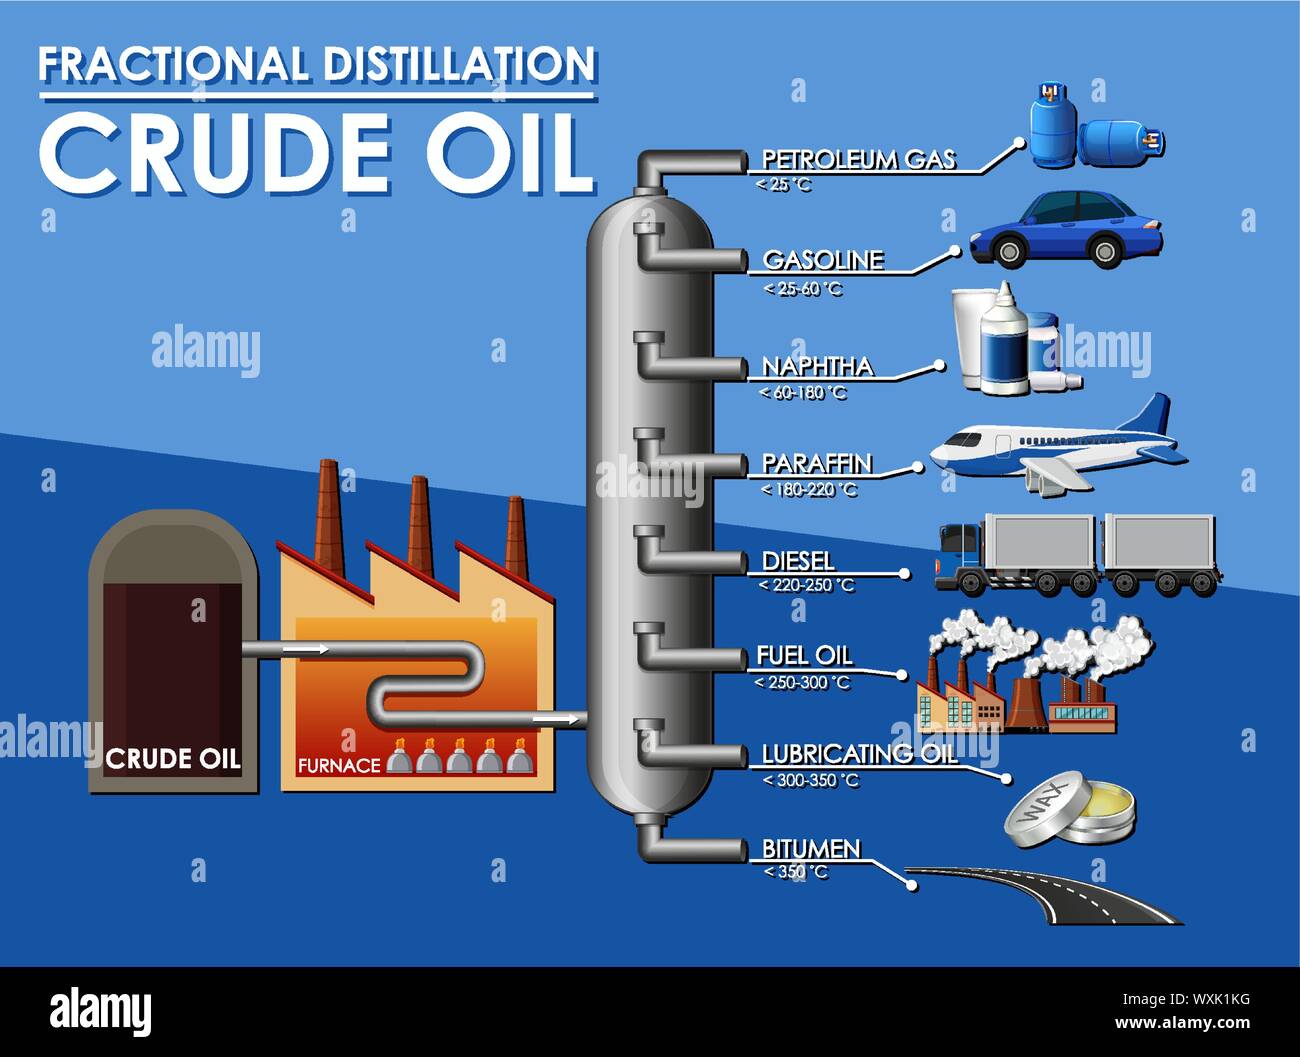 Fractional Distillation Of Crude Oil Labeled Educational Explanation ...